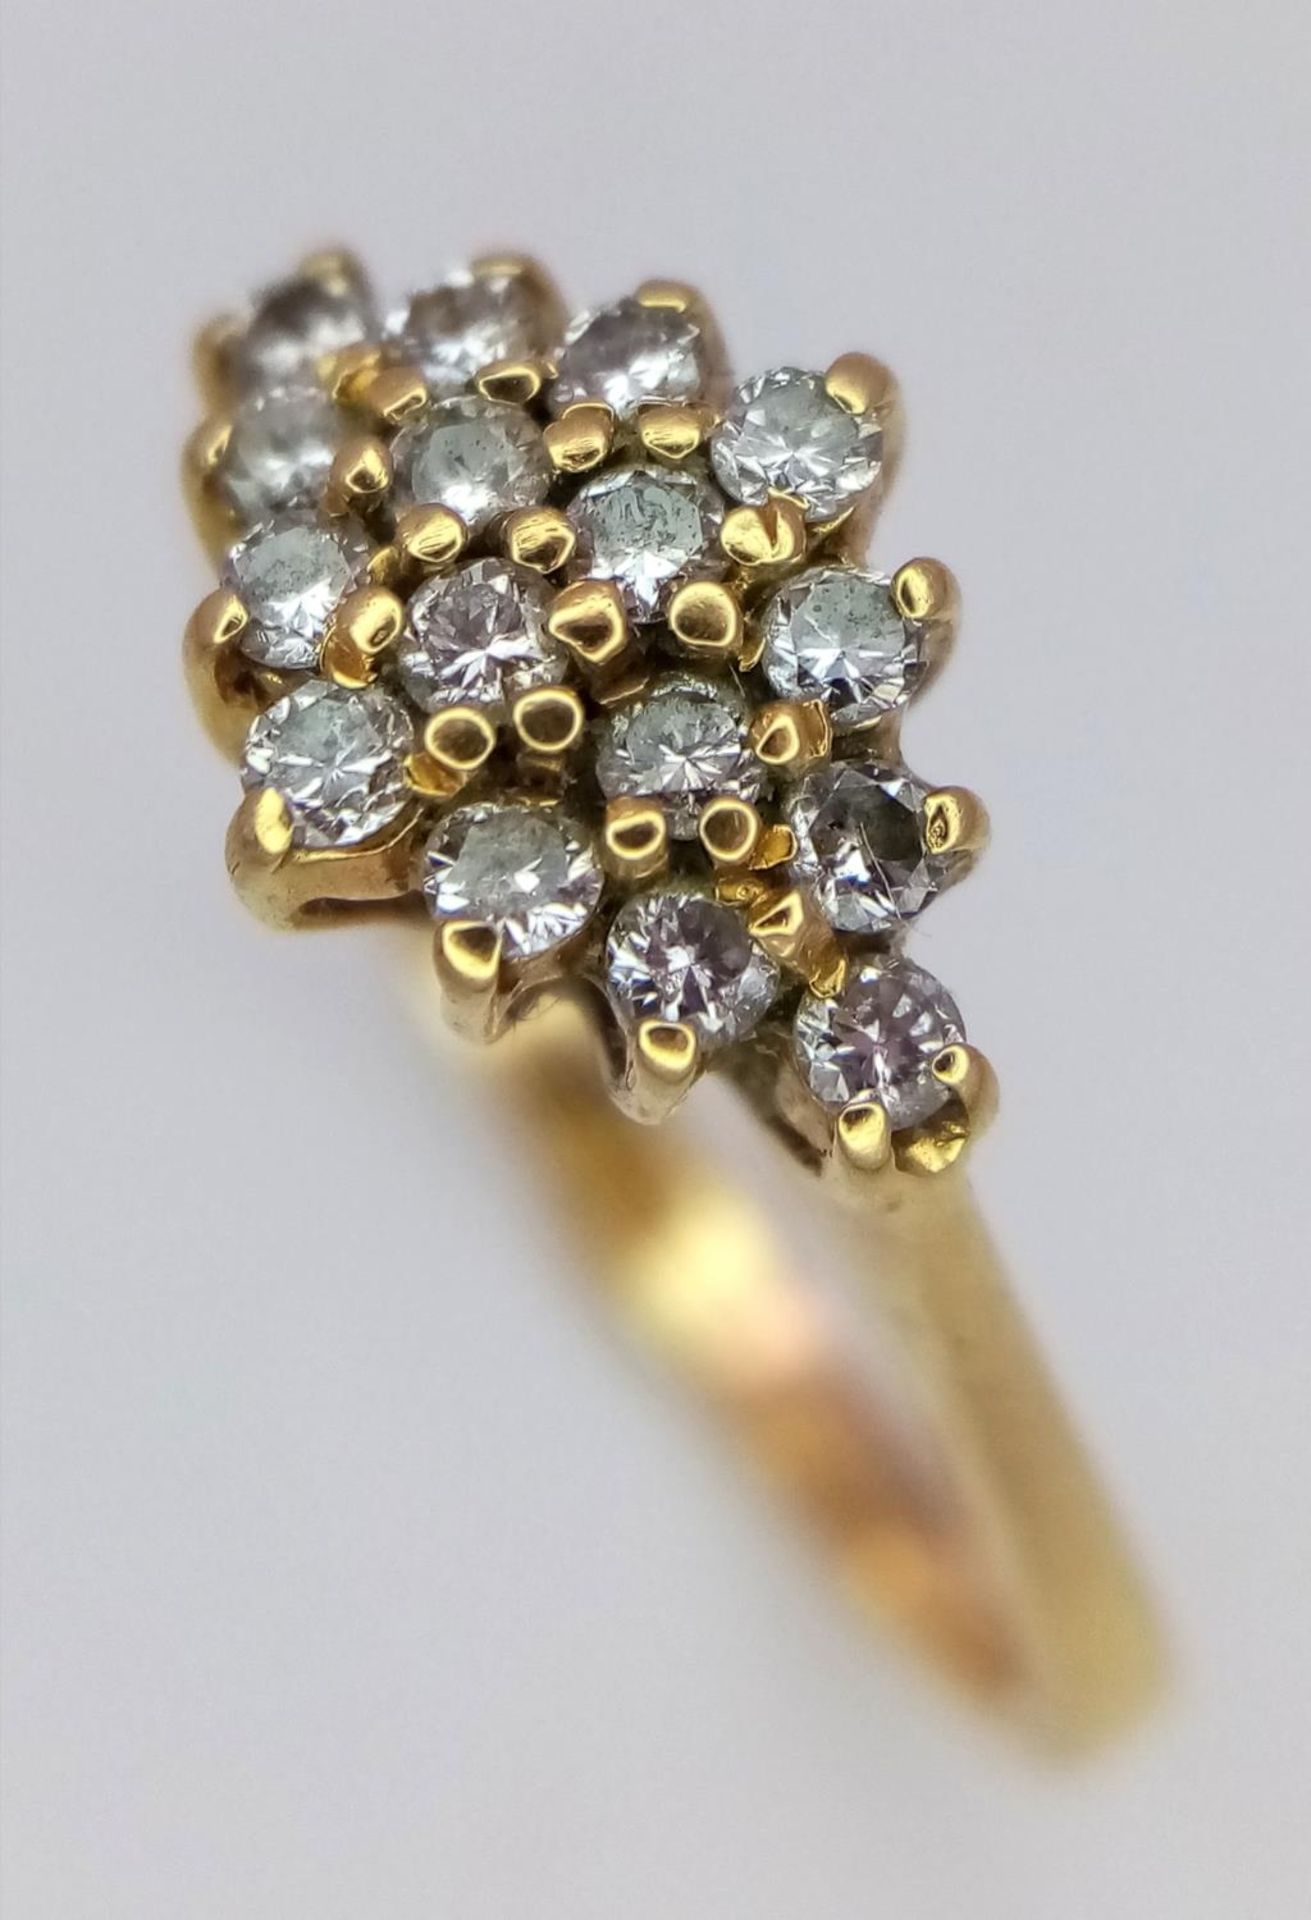 A 18K YELLOW GOLD DIAMOND CLUSTER RING 0.25CT 2.9G SIZE N A/S 1026 - Image 3 of 5